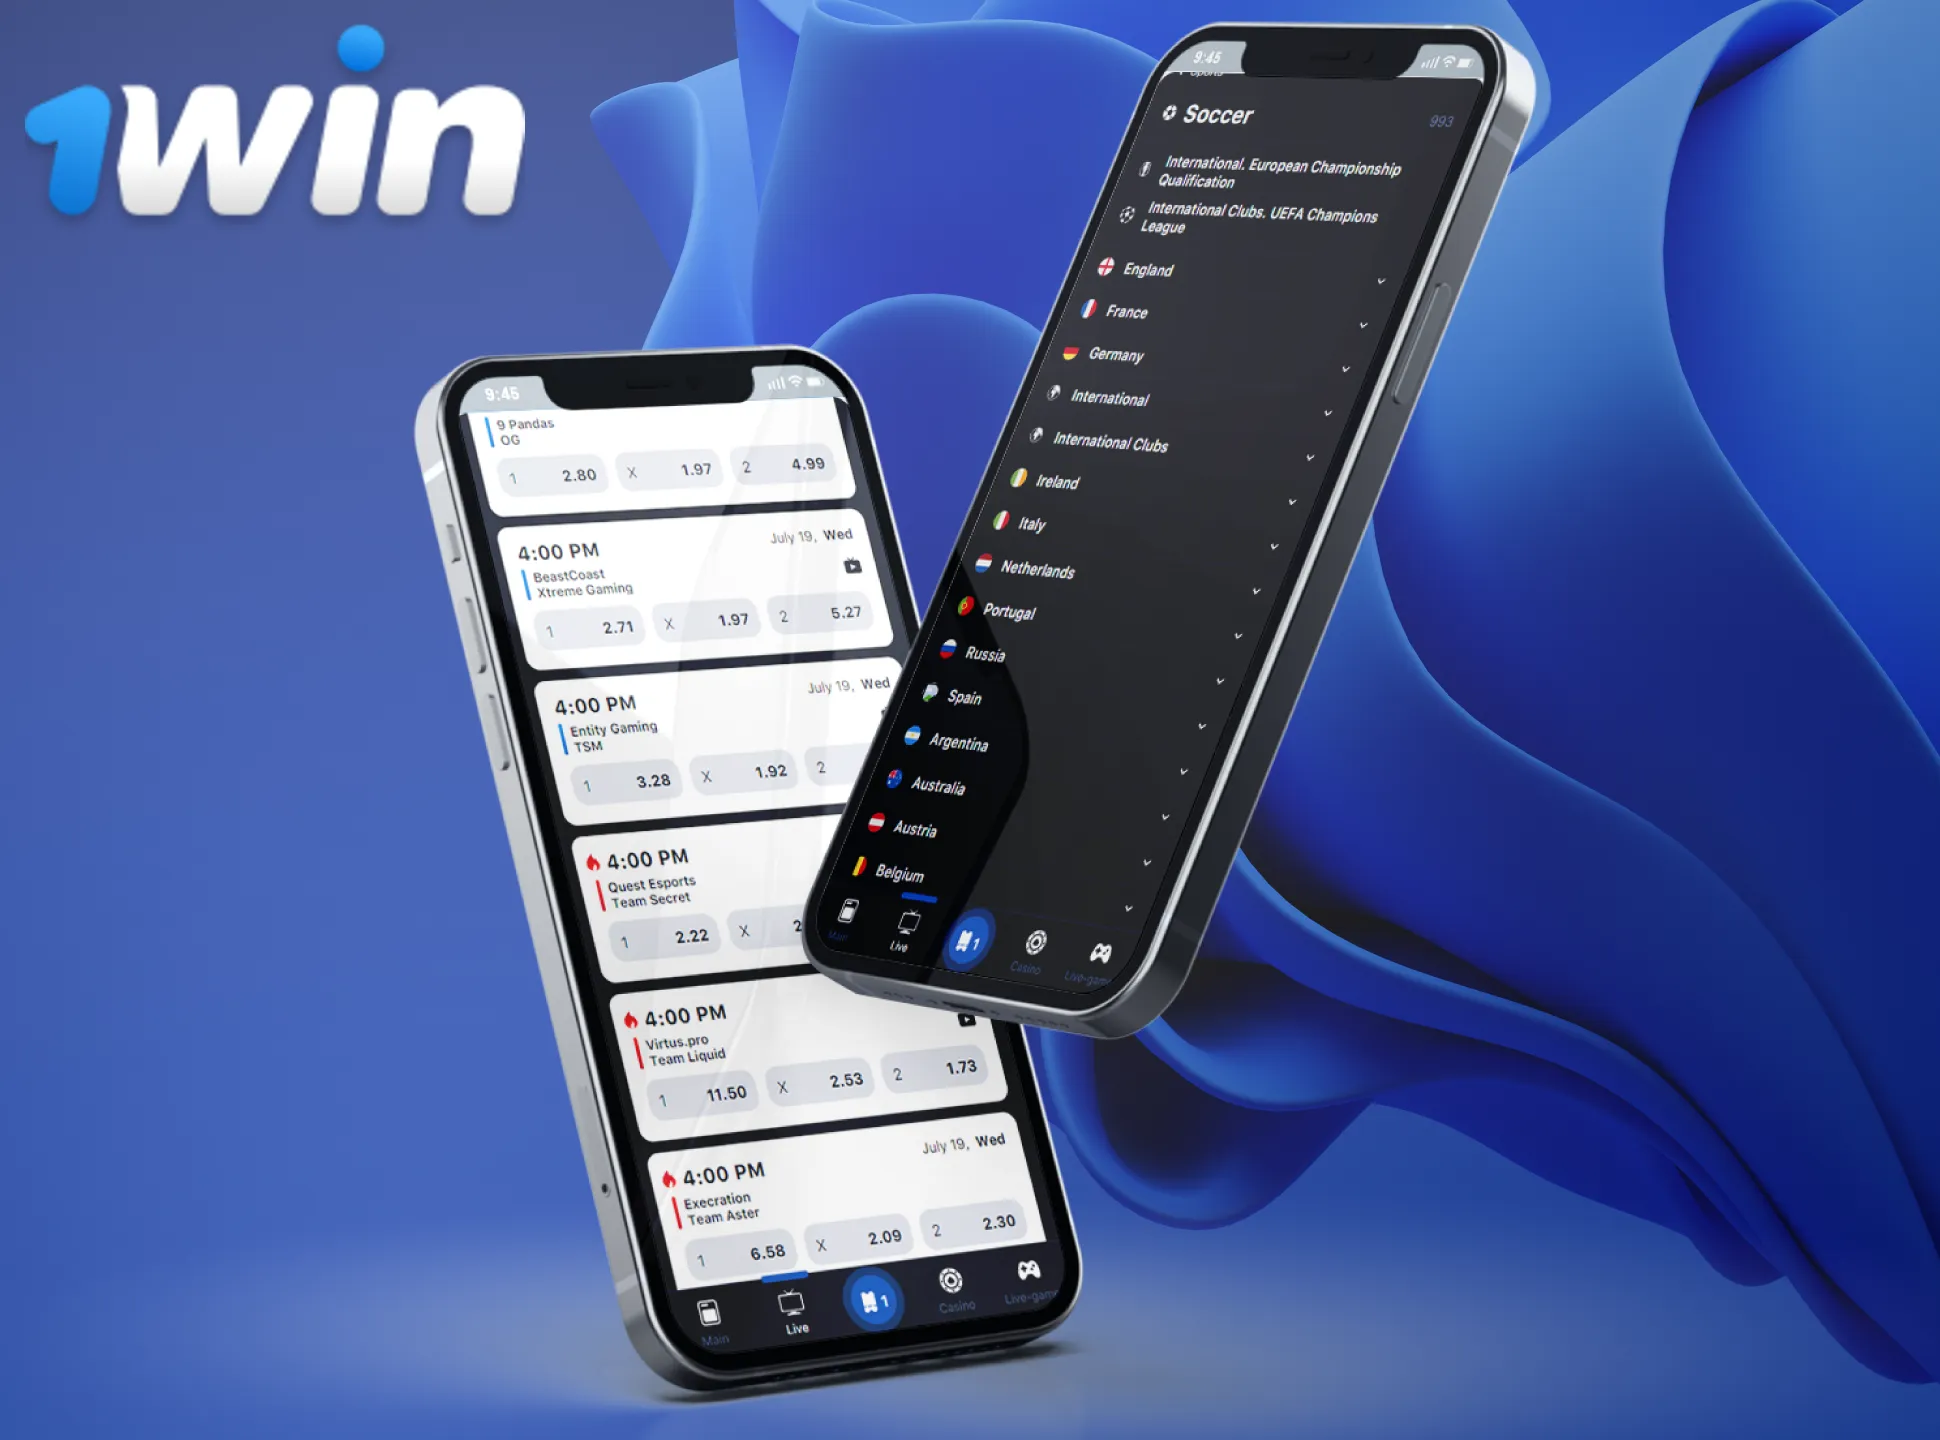 1win app has all the features of the website.